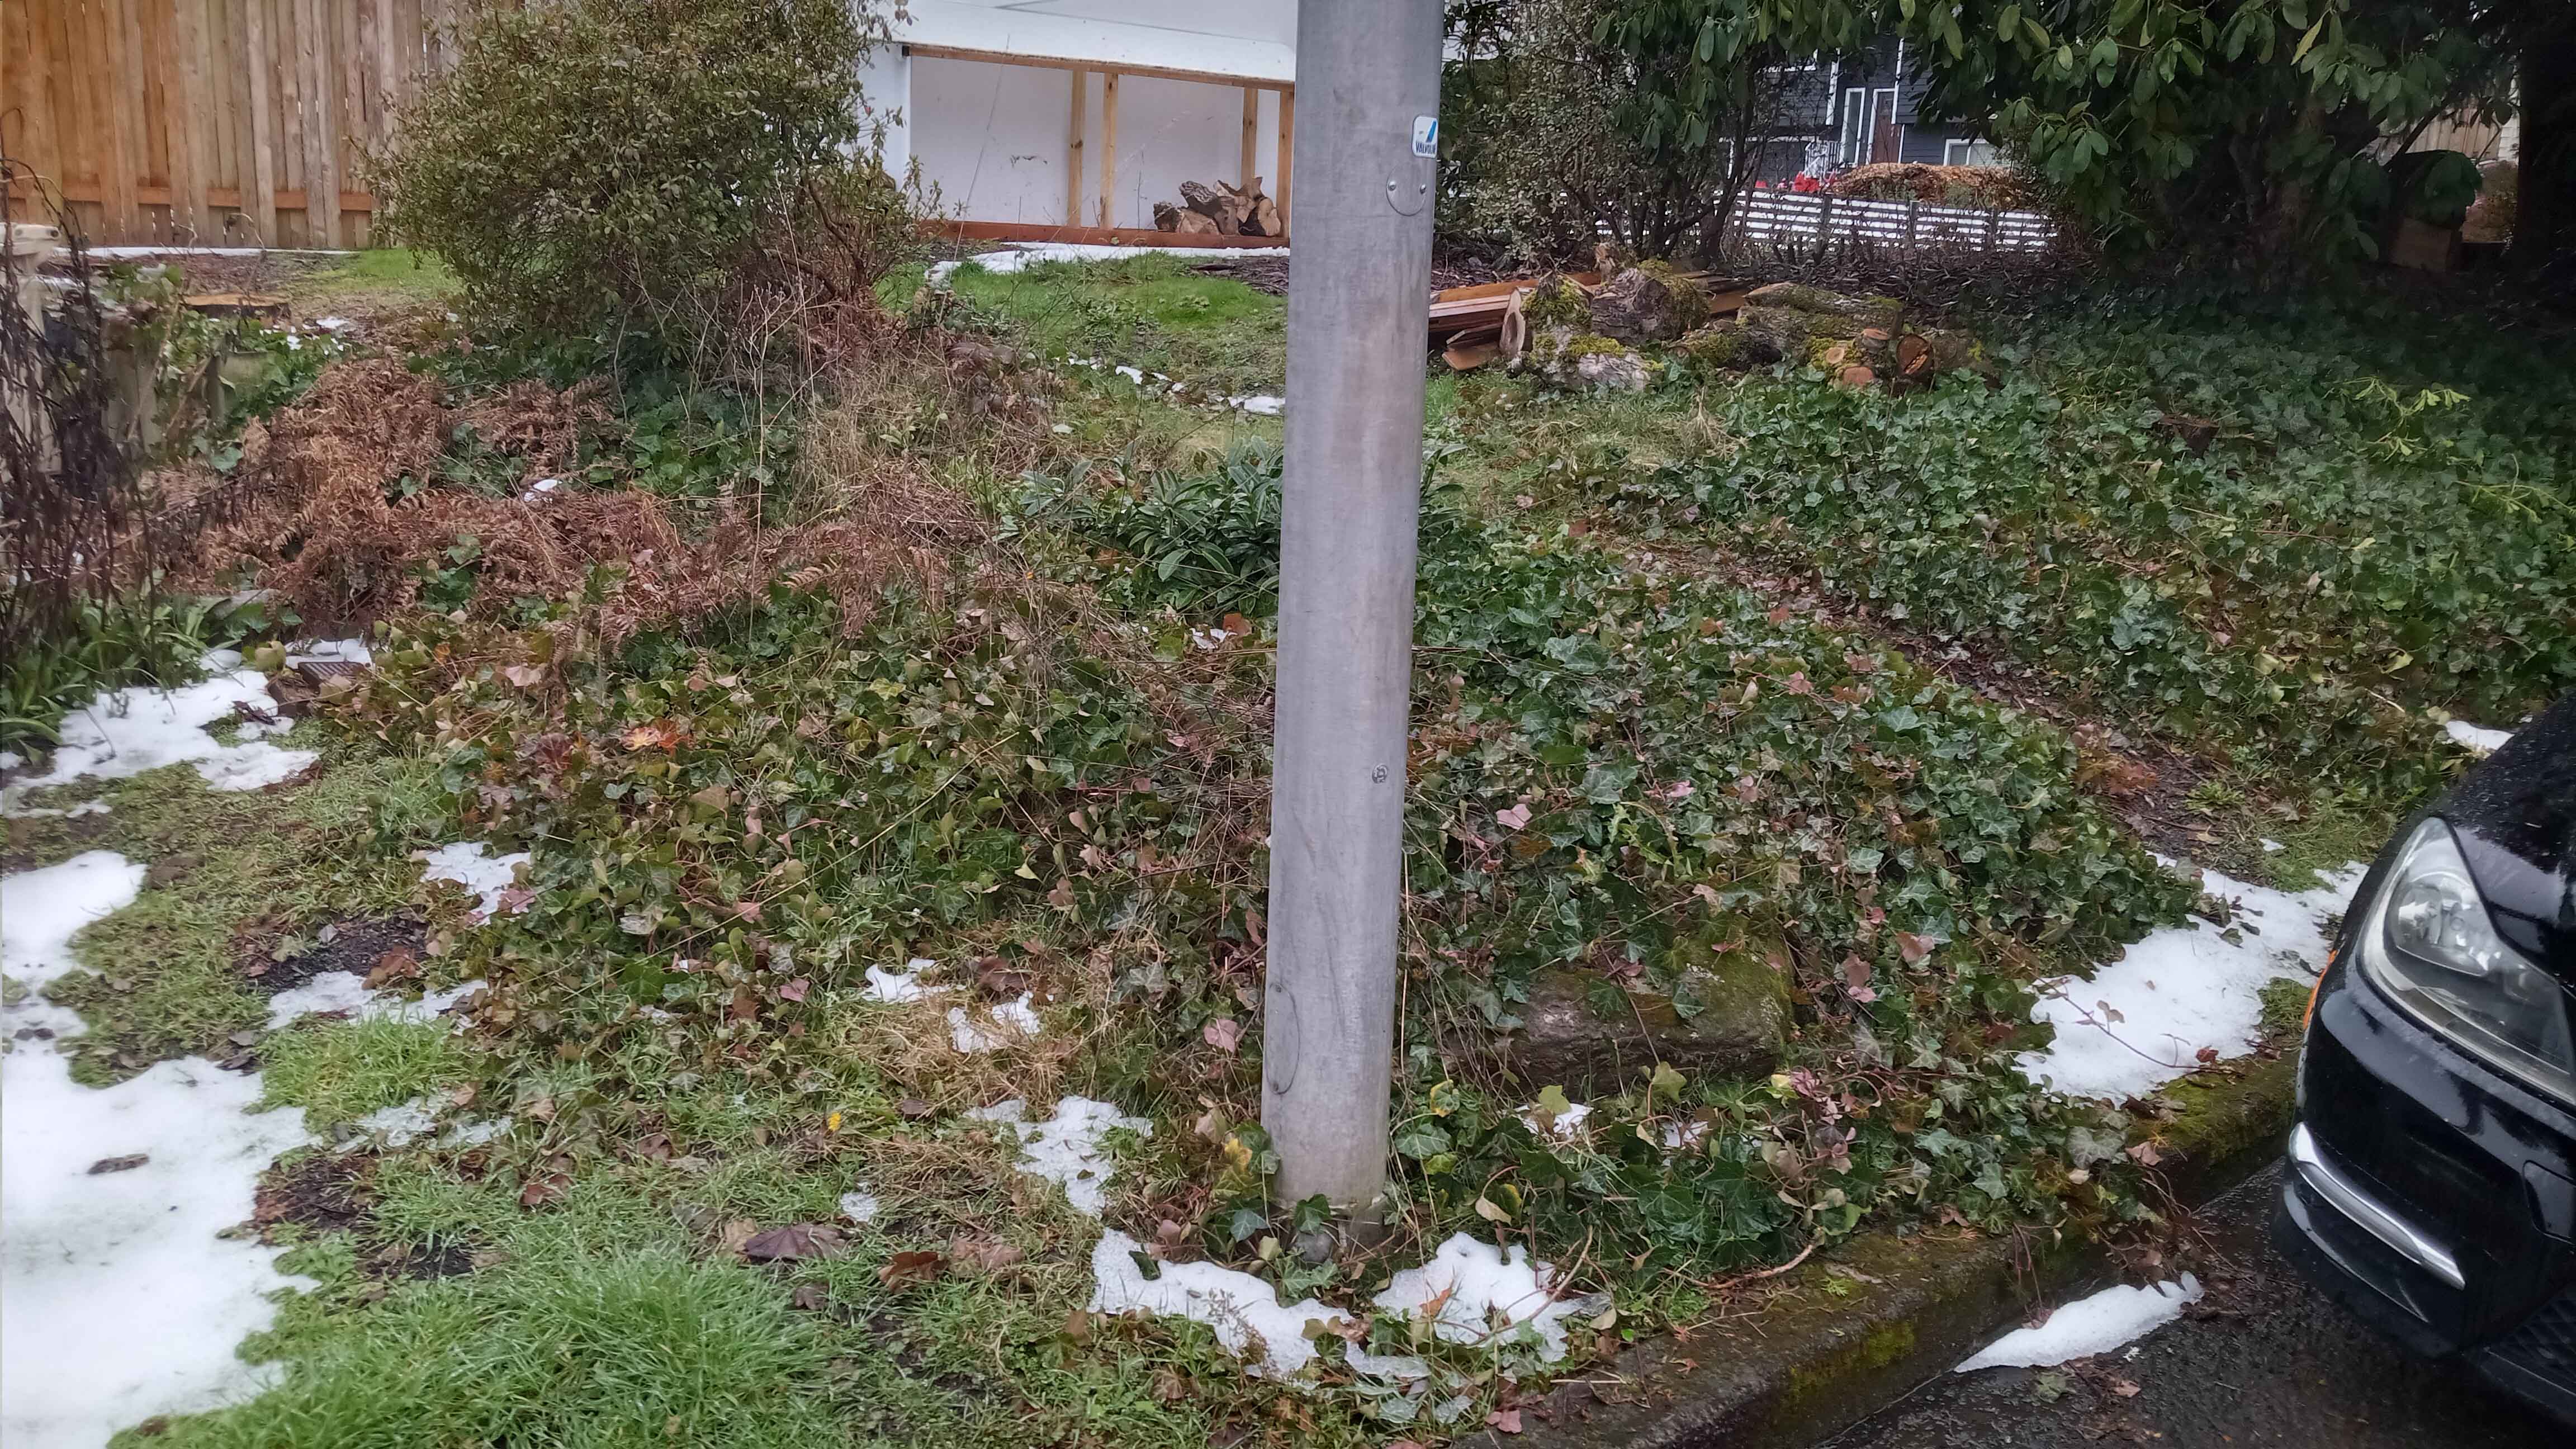 Edge of property with unkept and overgrown yard